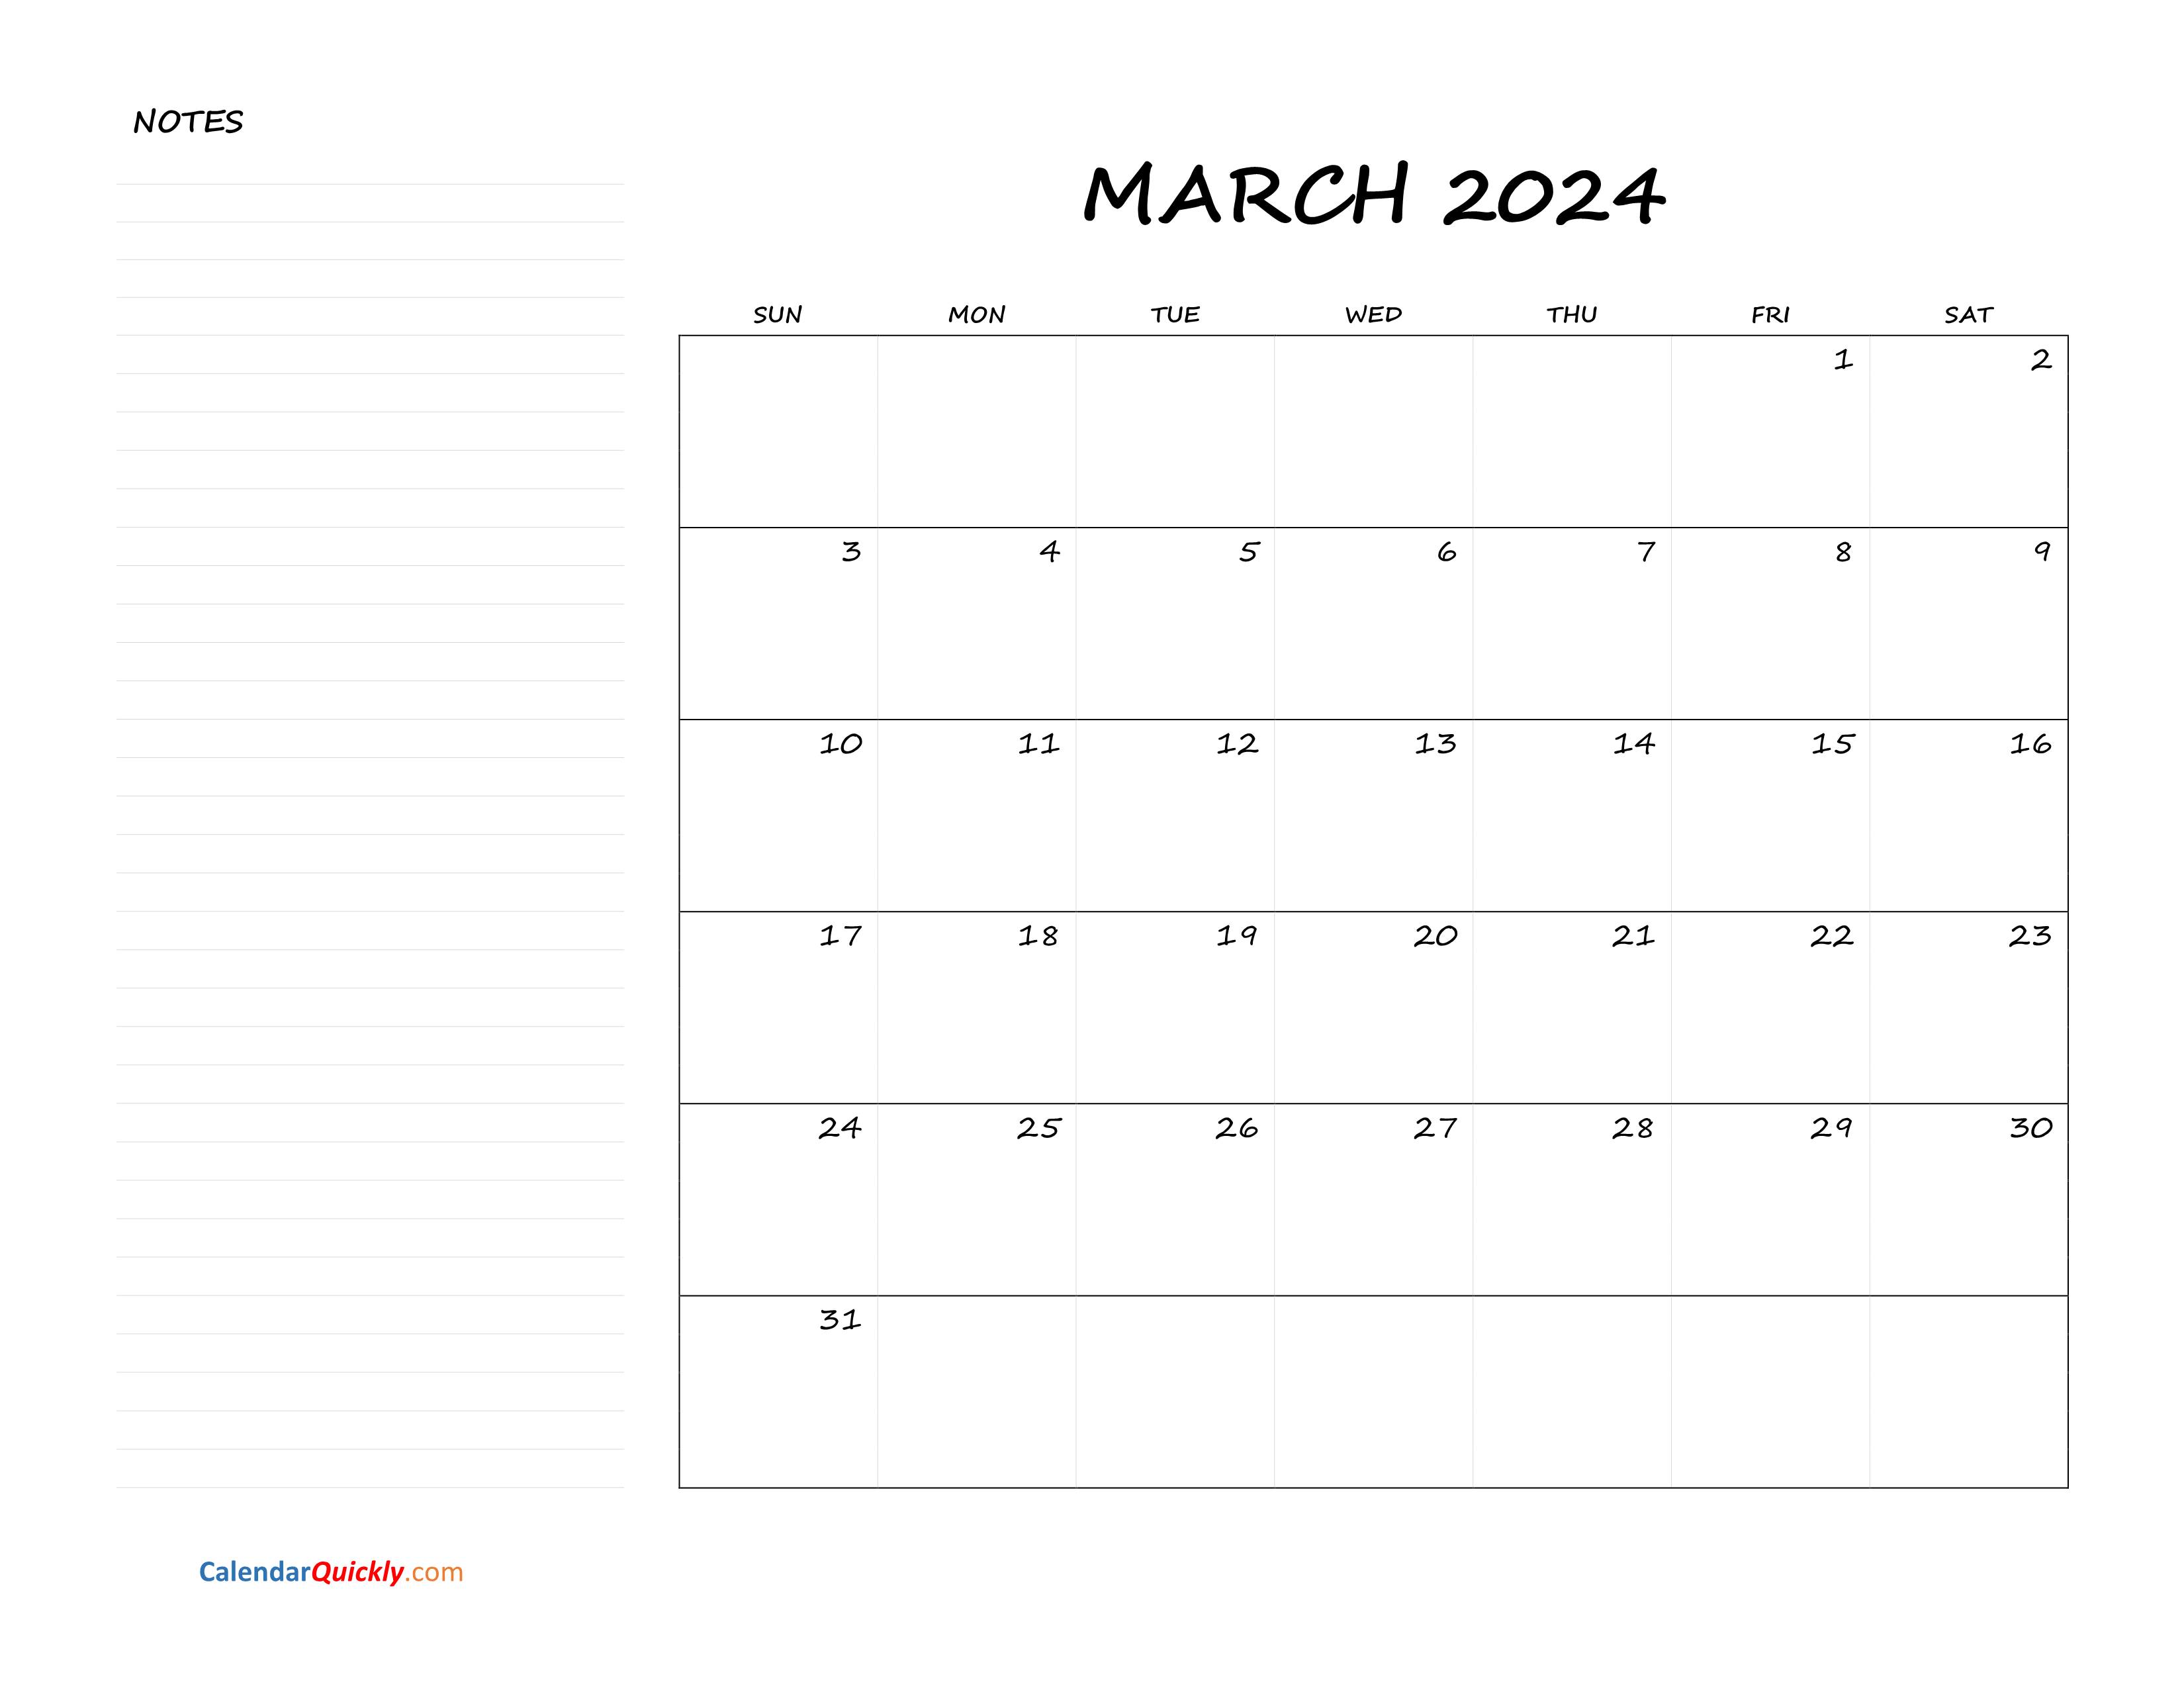 March Blank Calendar 2024 with Notes Calendar Quickly